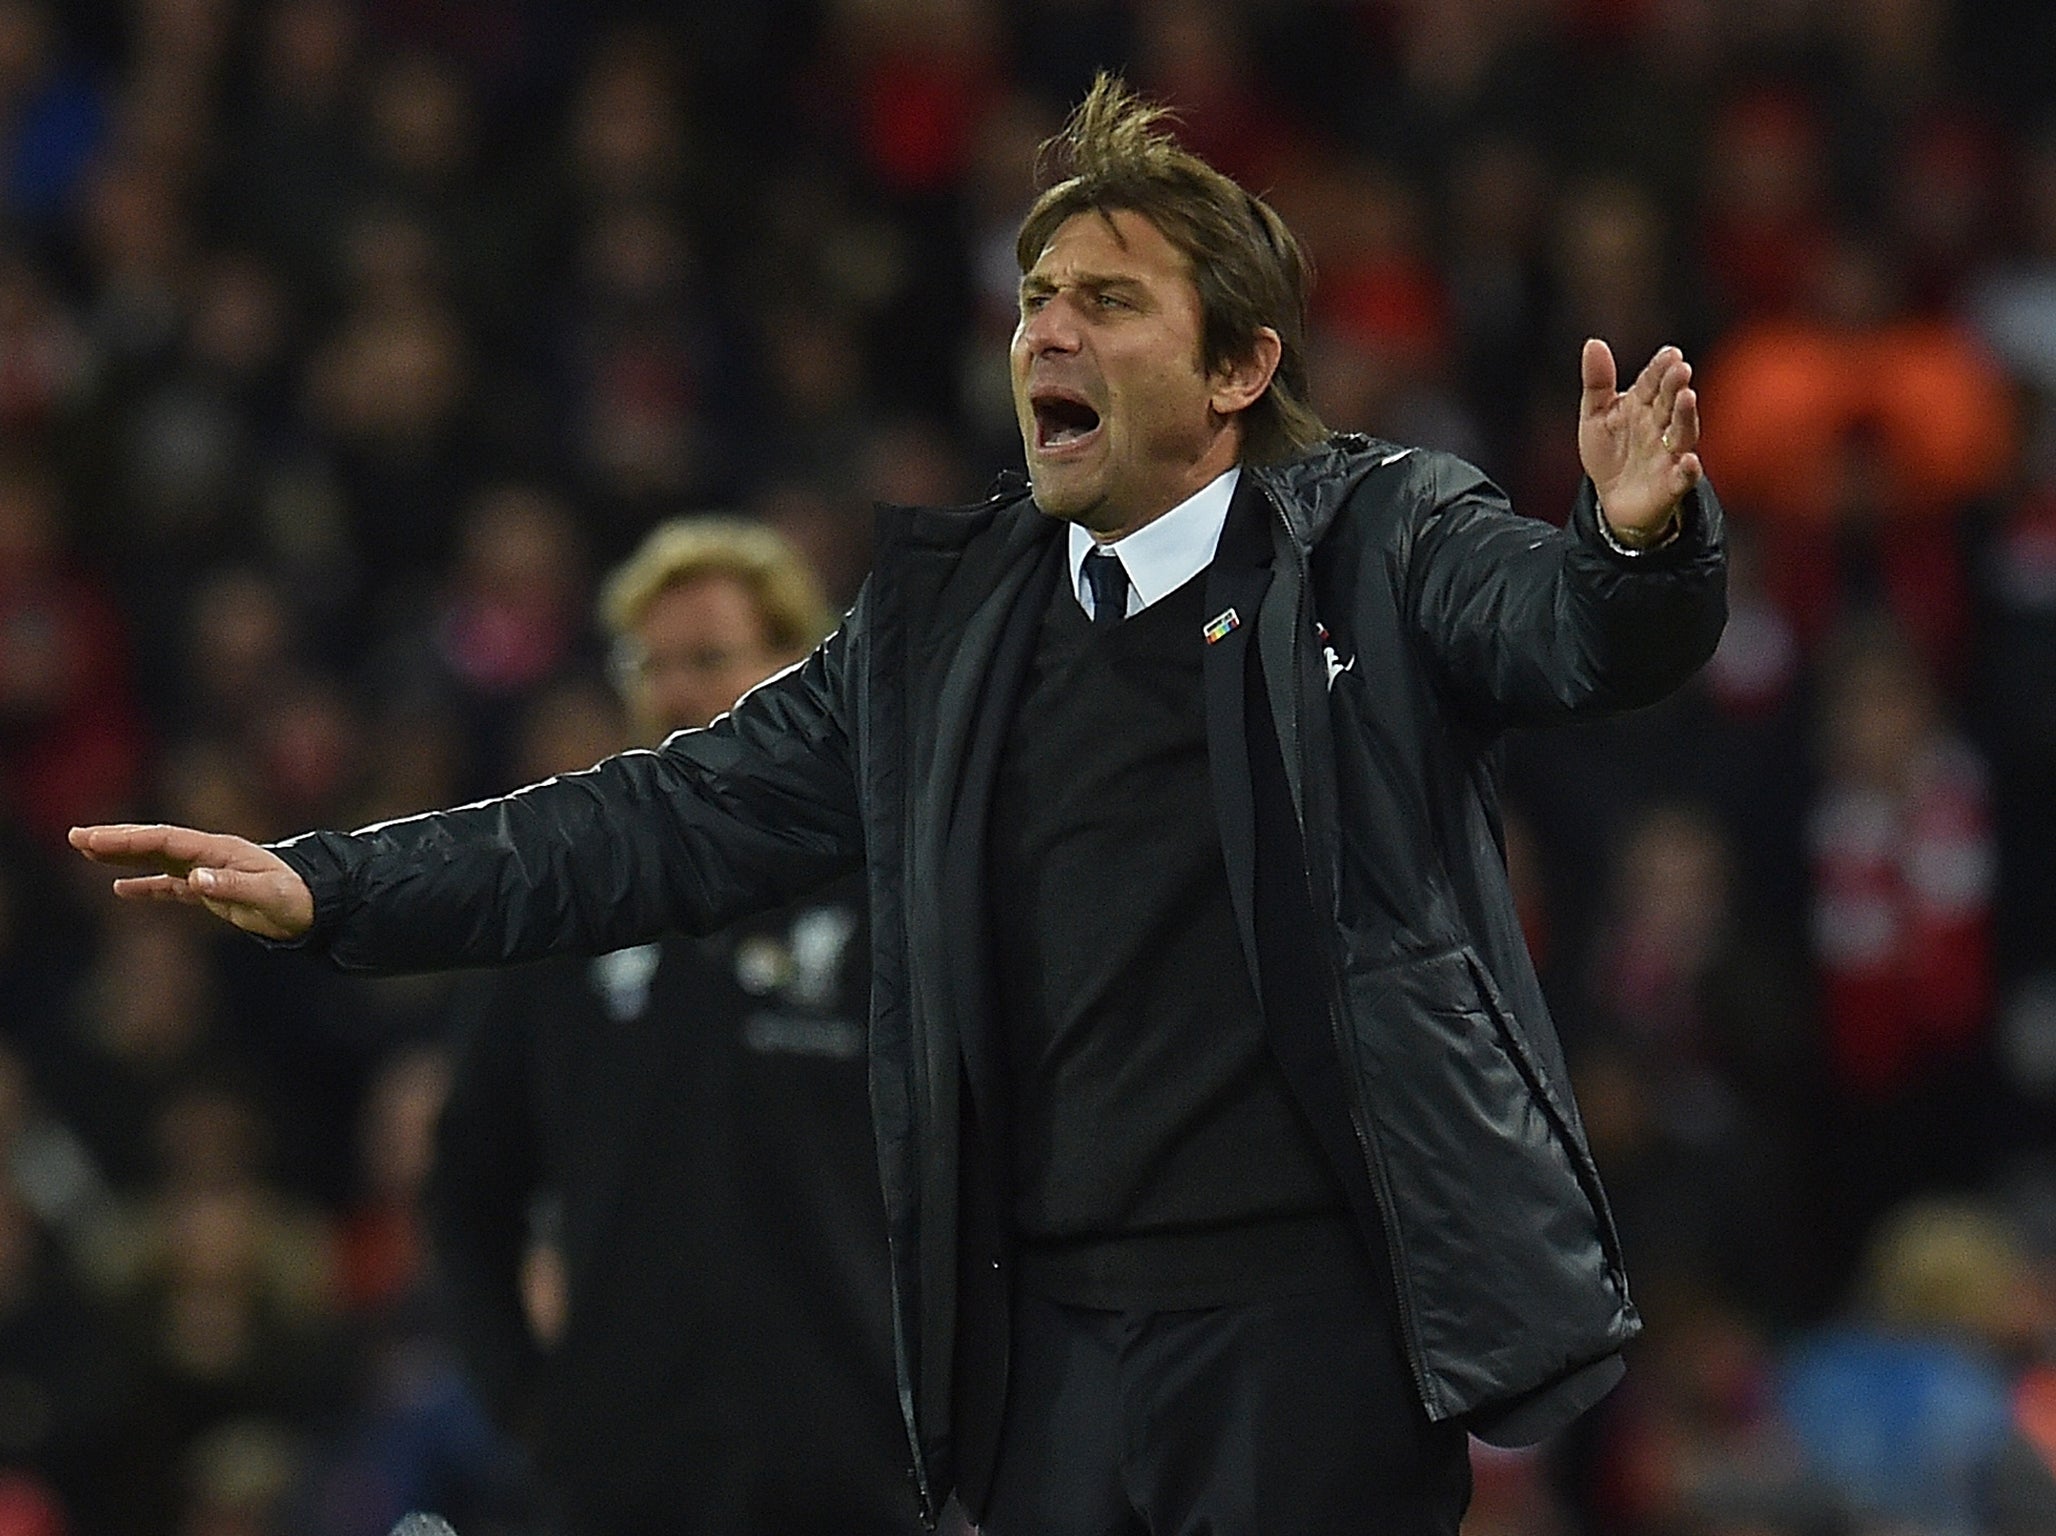 Against Liverpool, Chelsea came close to suffering their fourth league defeat of the season